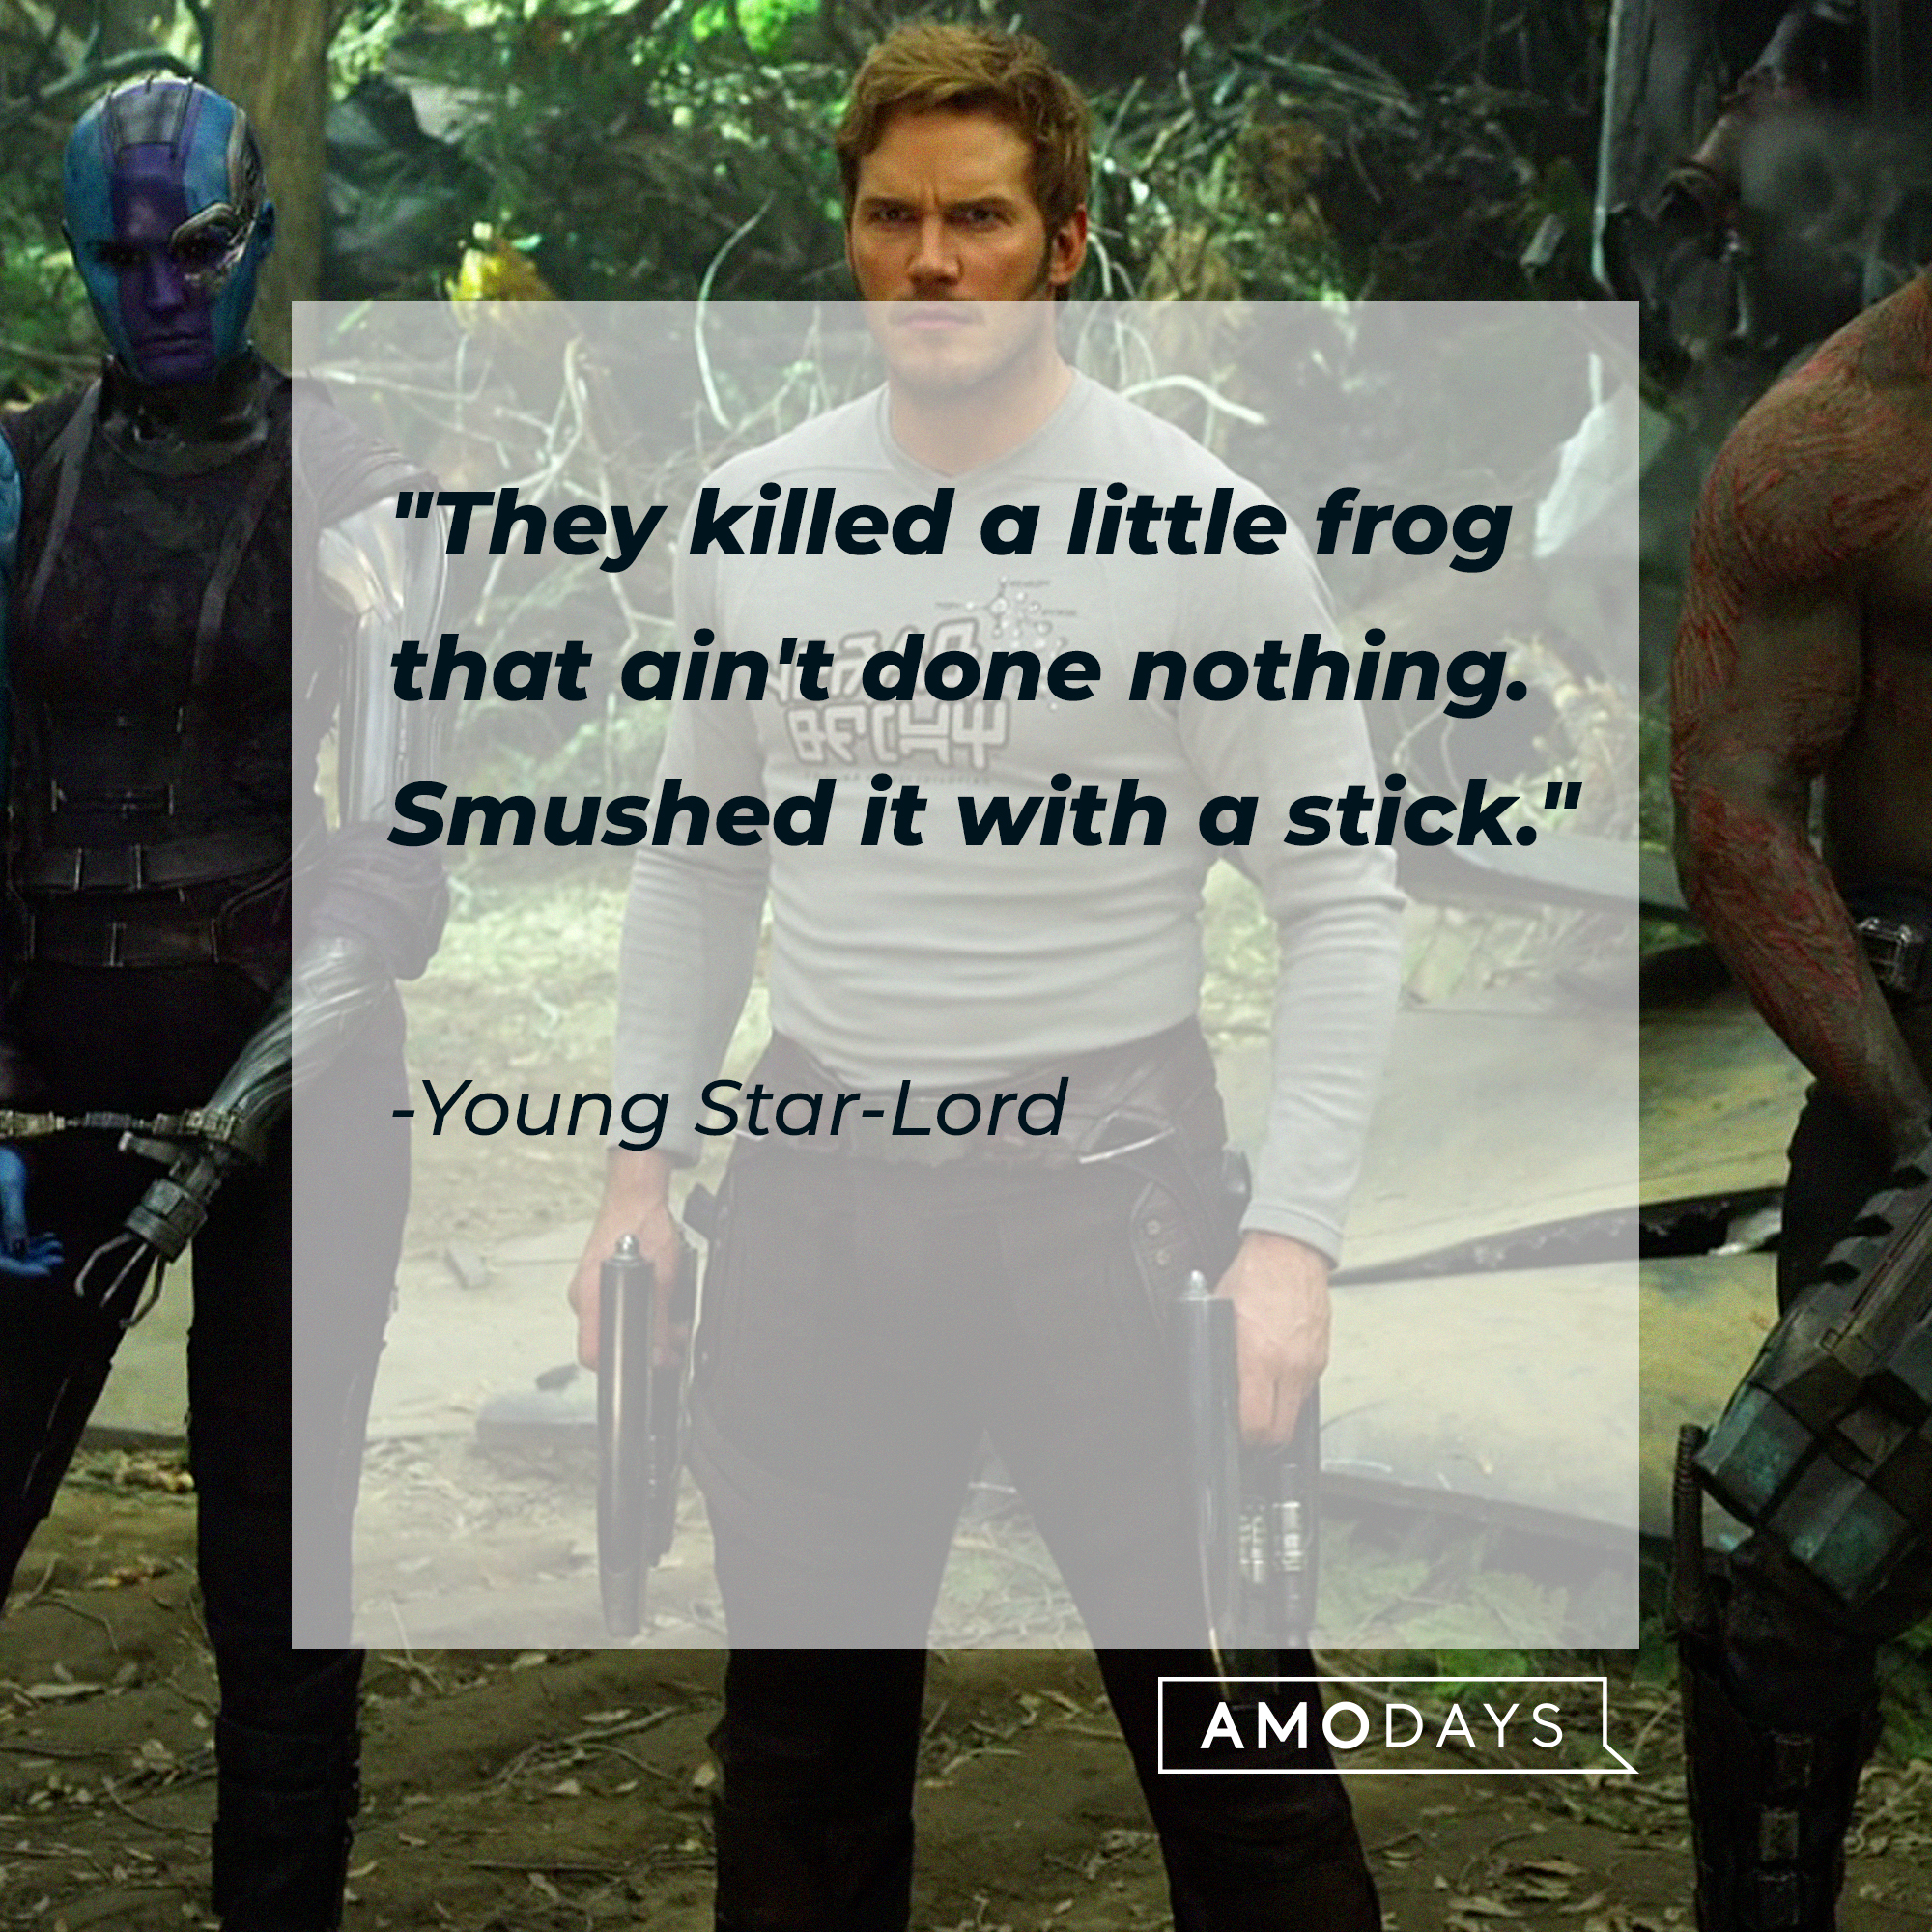 A photo of from "Guardians of the Galaxy" with Star-Lord's quote, "They killed a little frog that ain't done nothing. Smushed it with a stick." | Source: Facebook/guardiansofthegalaxy